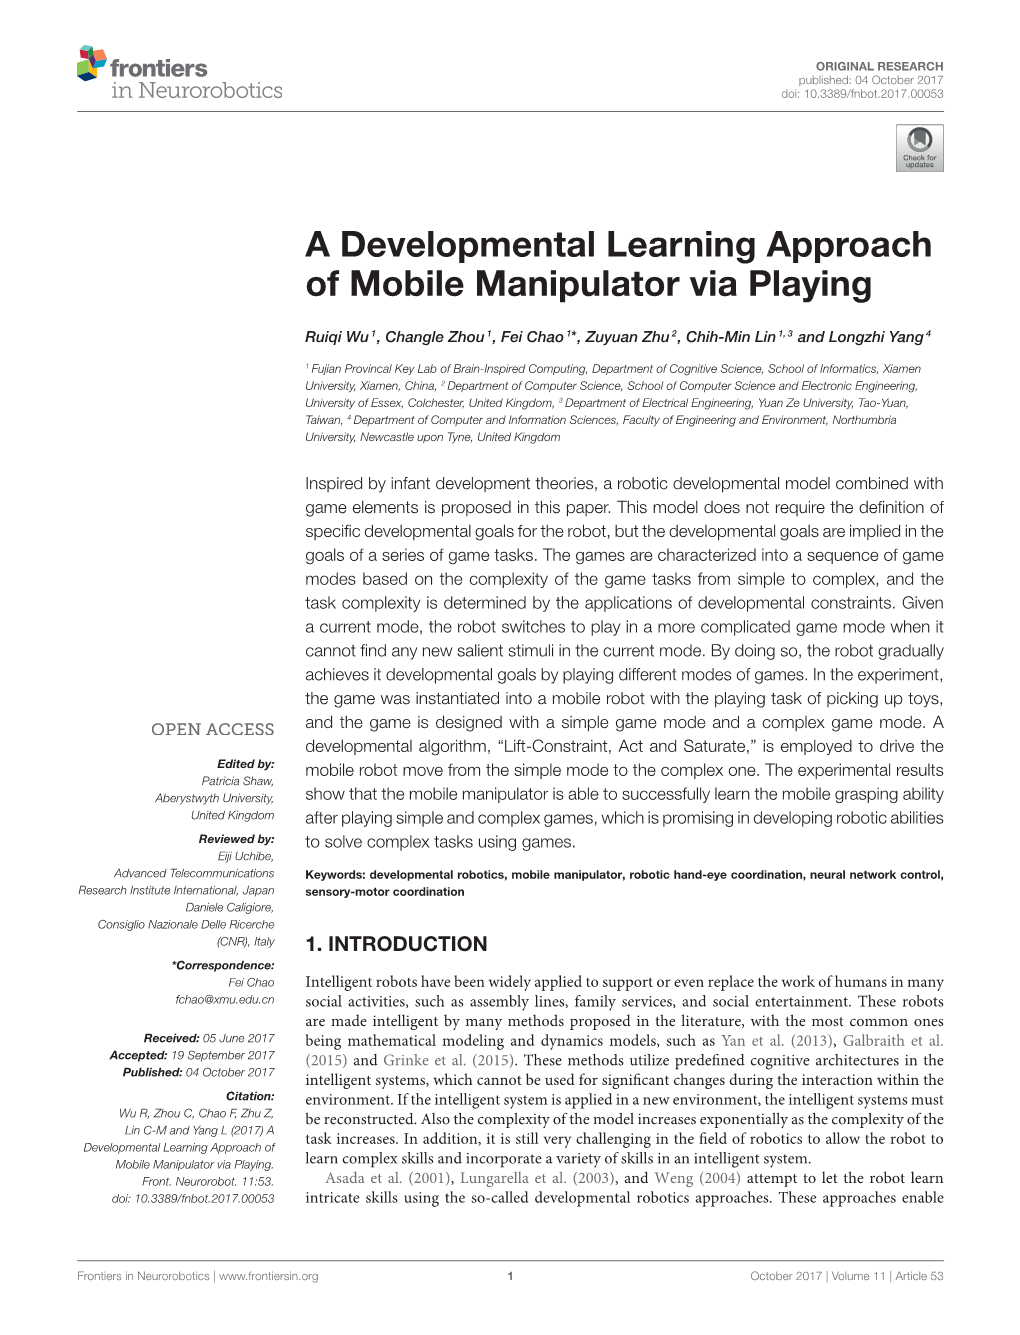 A Developmental Learning Approach of Mobile Manipulator Via Playing